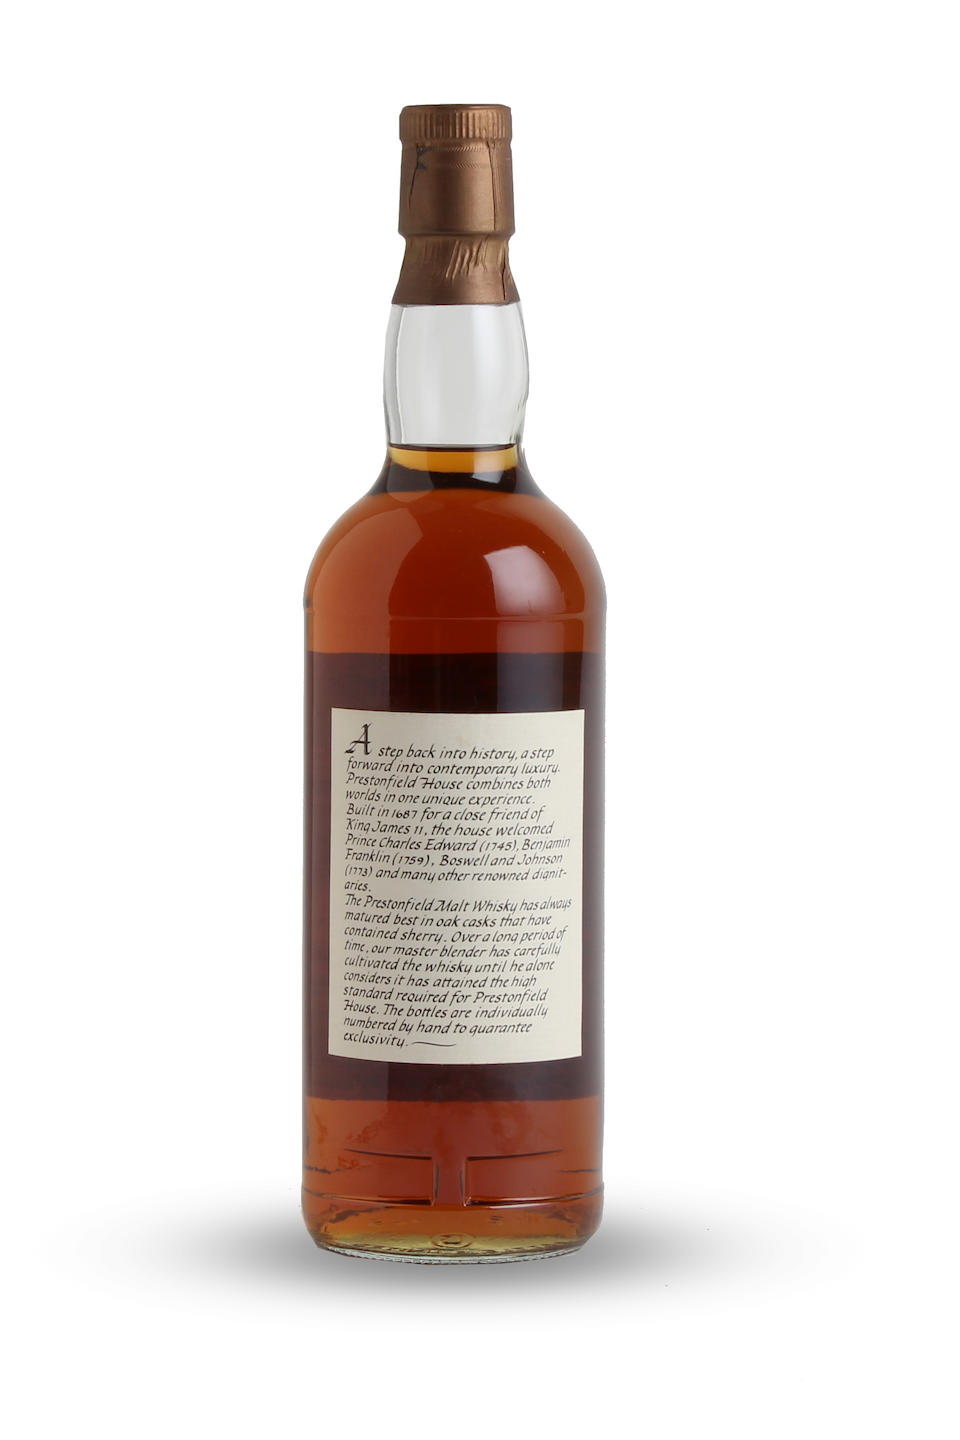 The Prestonfield Bowmore-22 year old-1965